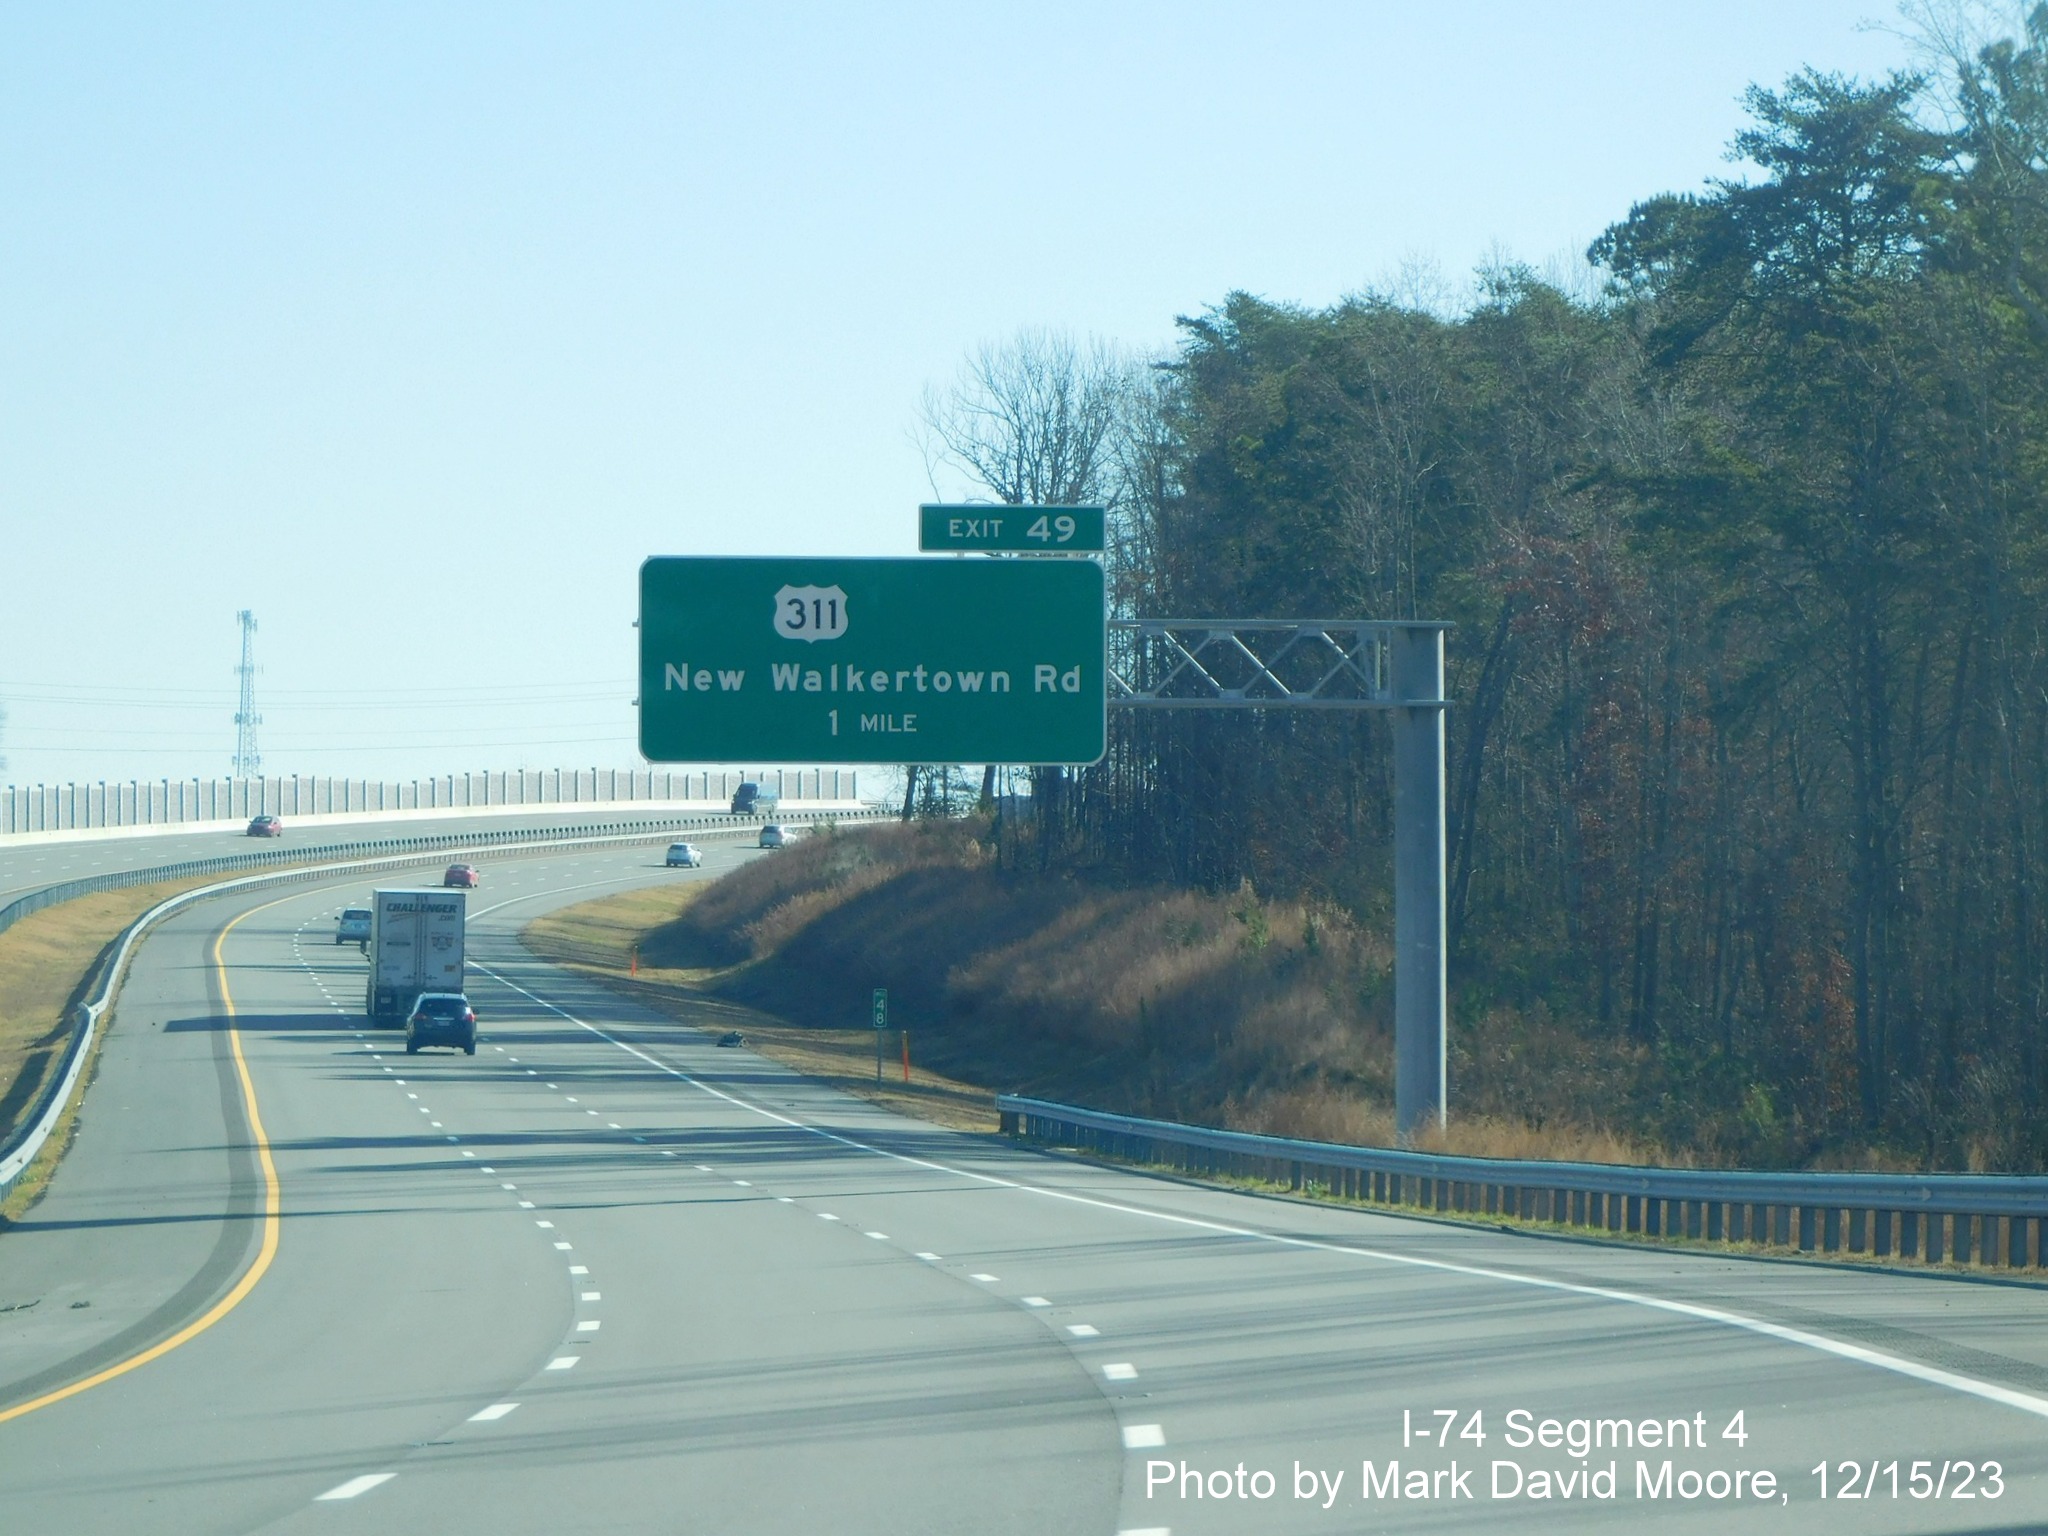 Image of the 1 Mile advance overhead sign for the US 311 exit on NC 74 (Future I-74) East/
        Winston-Salem Northern Beltway, there is a blank space next to the shield for a future West label, by Mark David Moore, December 2023